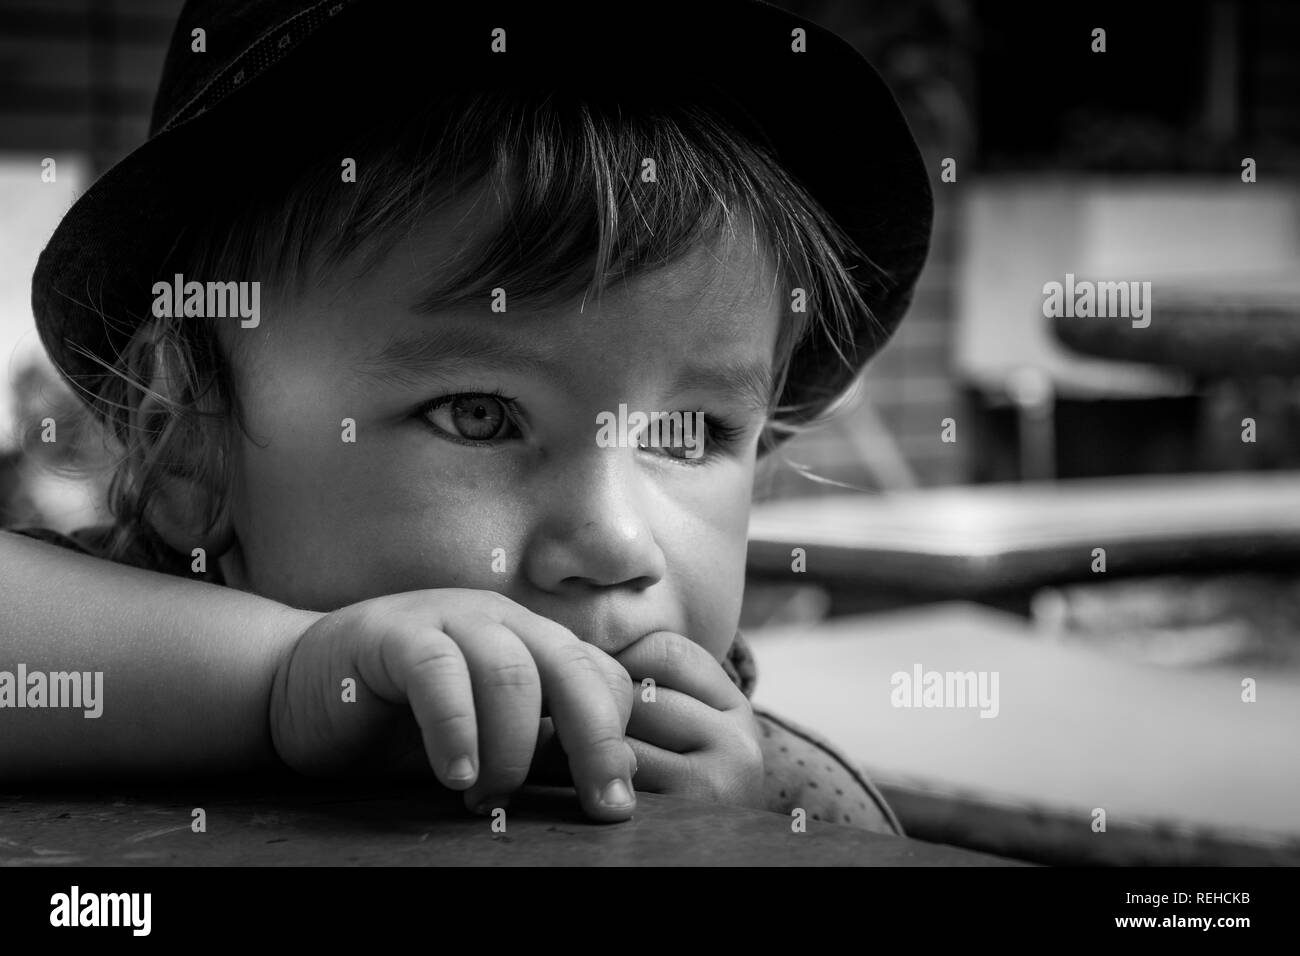 A black and white portrait of an adorable 2 years old baby boy wearing a hat. Stock Photo